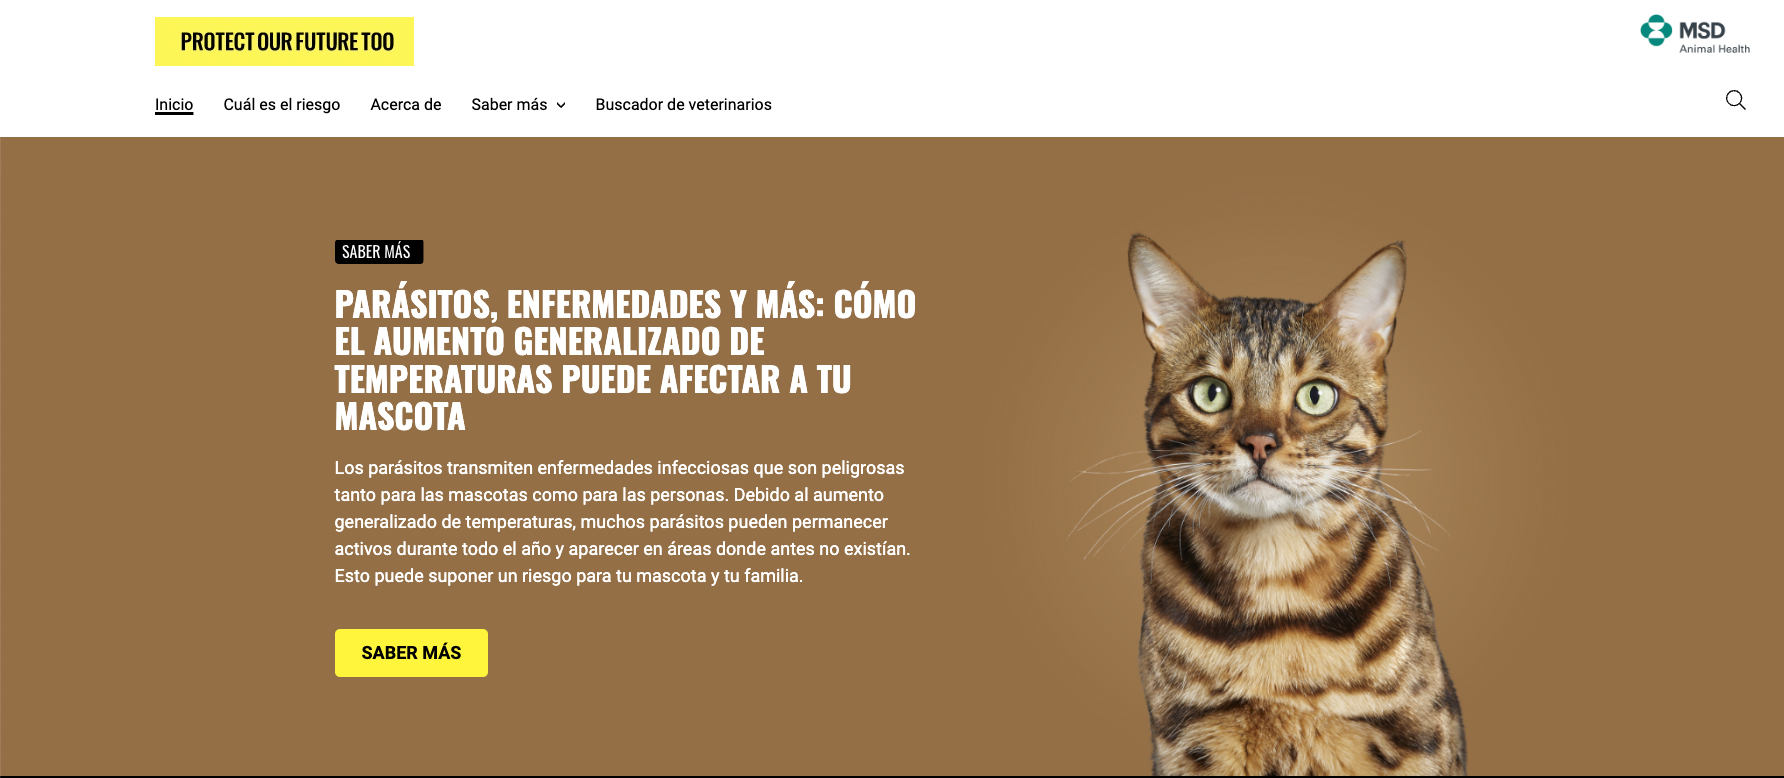 gato-msd-protect-our-future-to